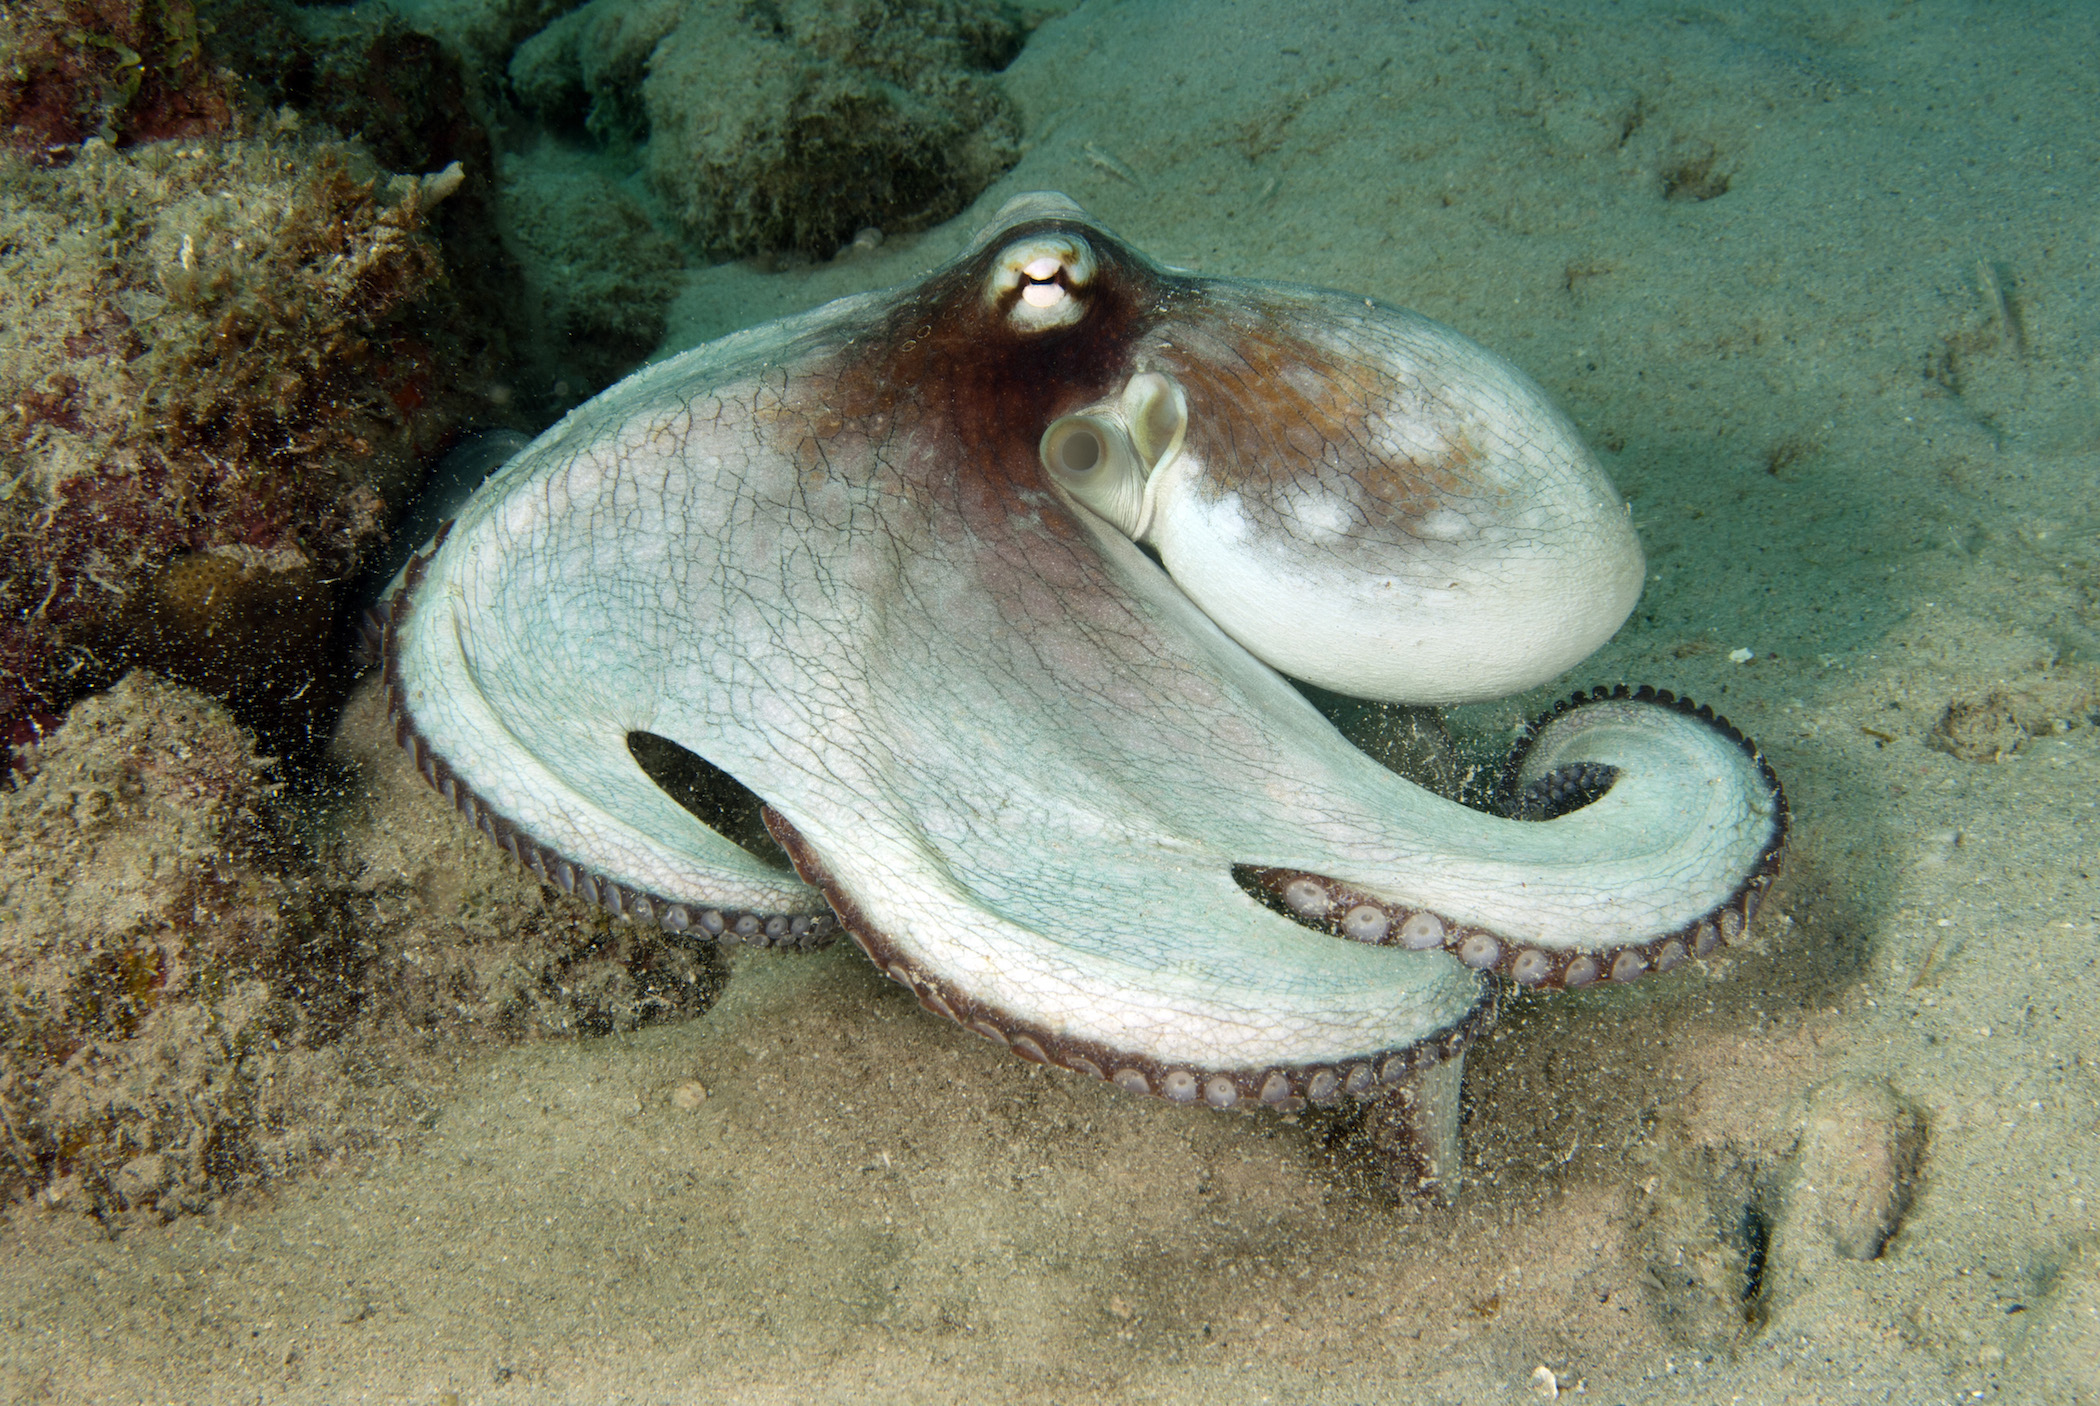 Common octopus (Octopus vulgaris) out hunting, Curacao, Netherlands Antilles. A new study gave octopuses ecstasy and examined their social behavior. (Photo by Wild Horizons/UIG via Getty Images)